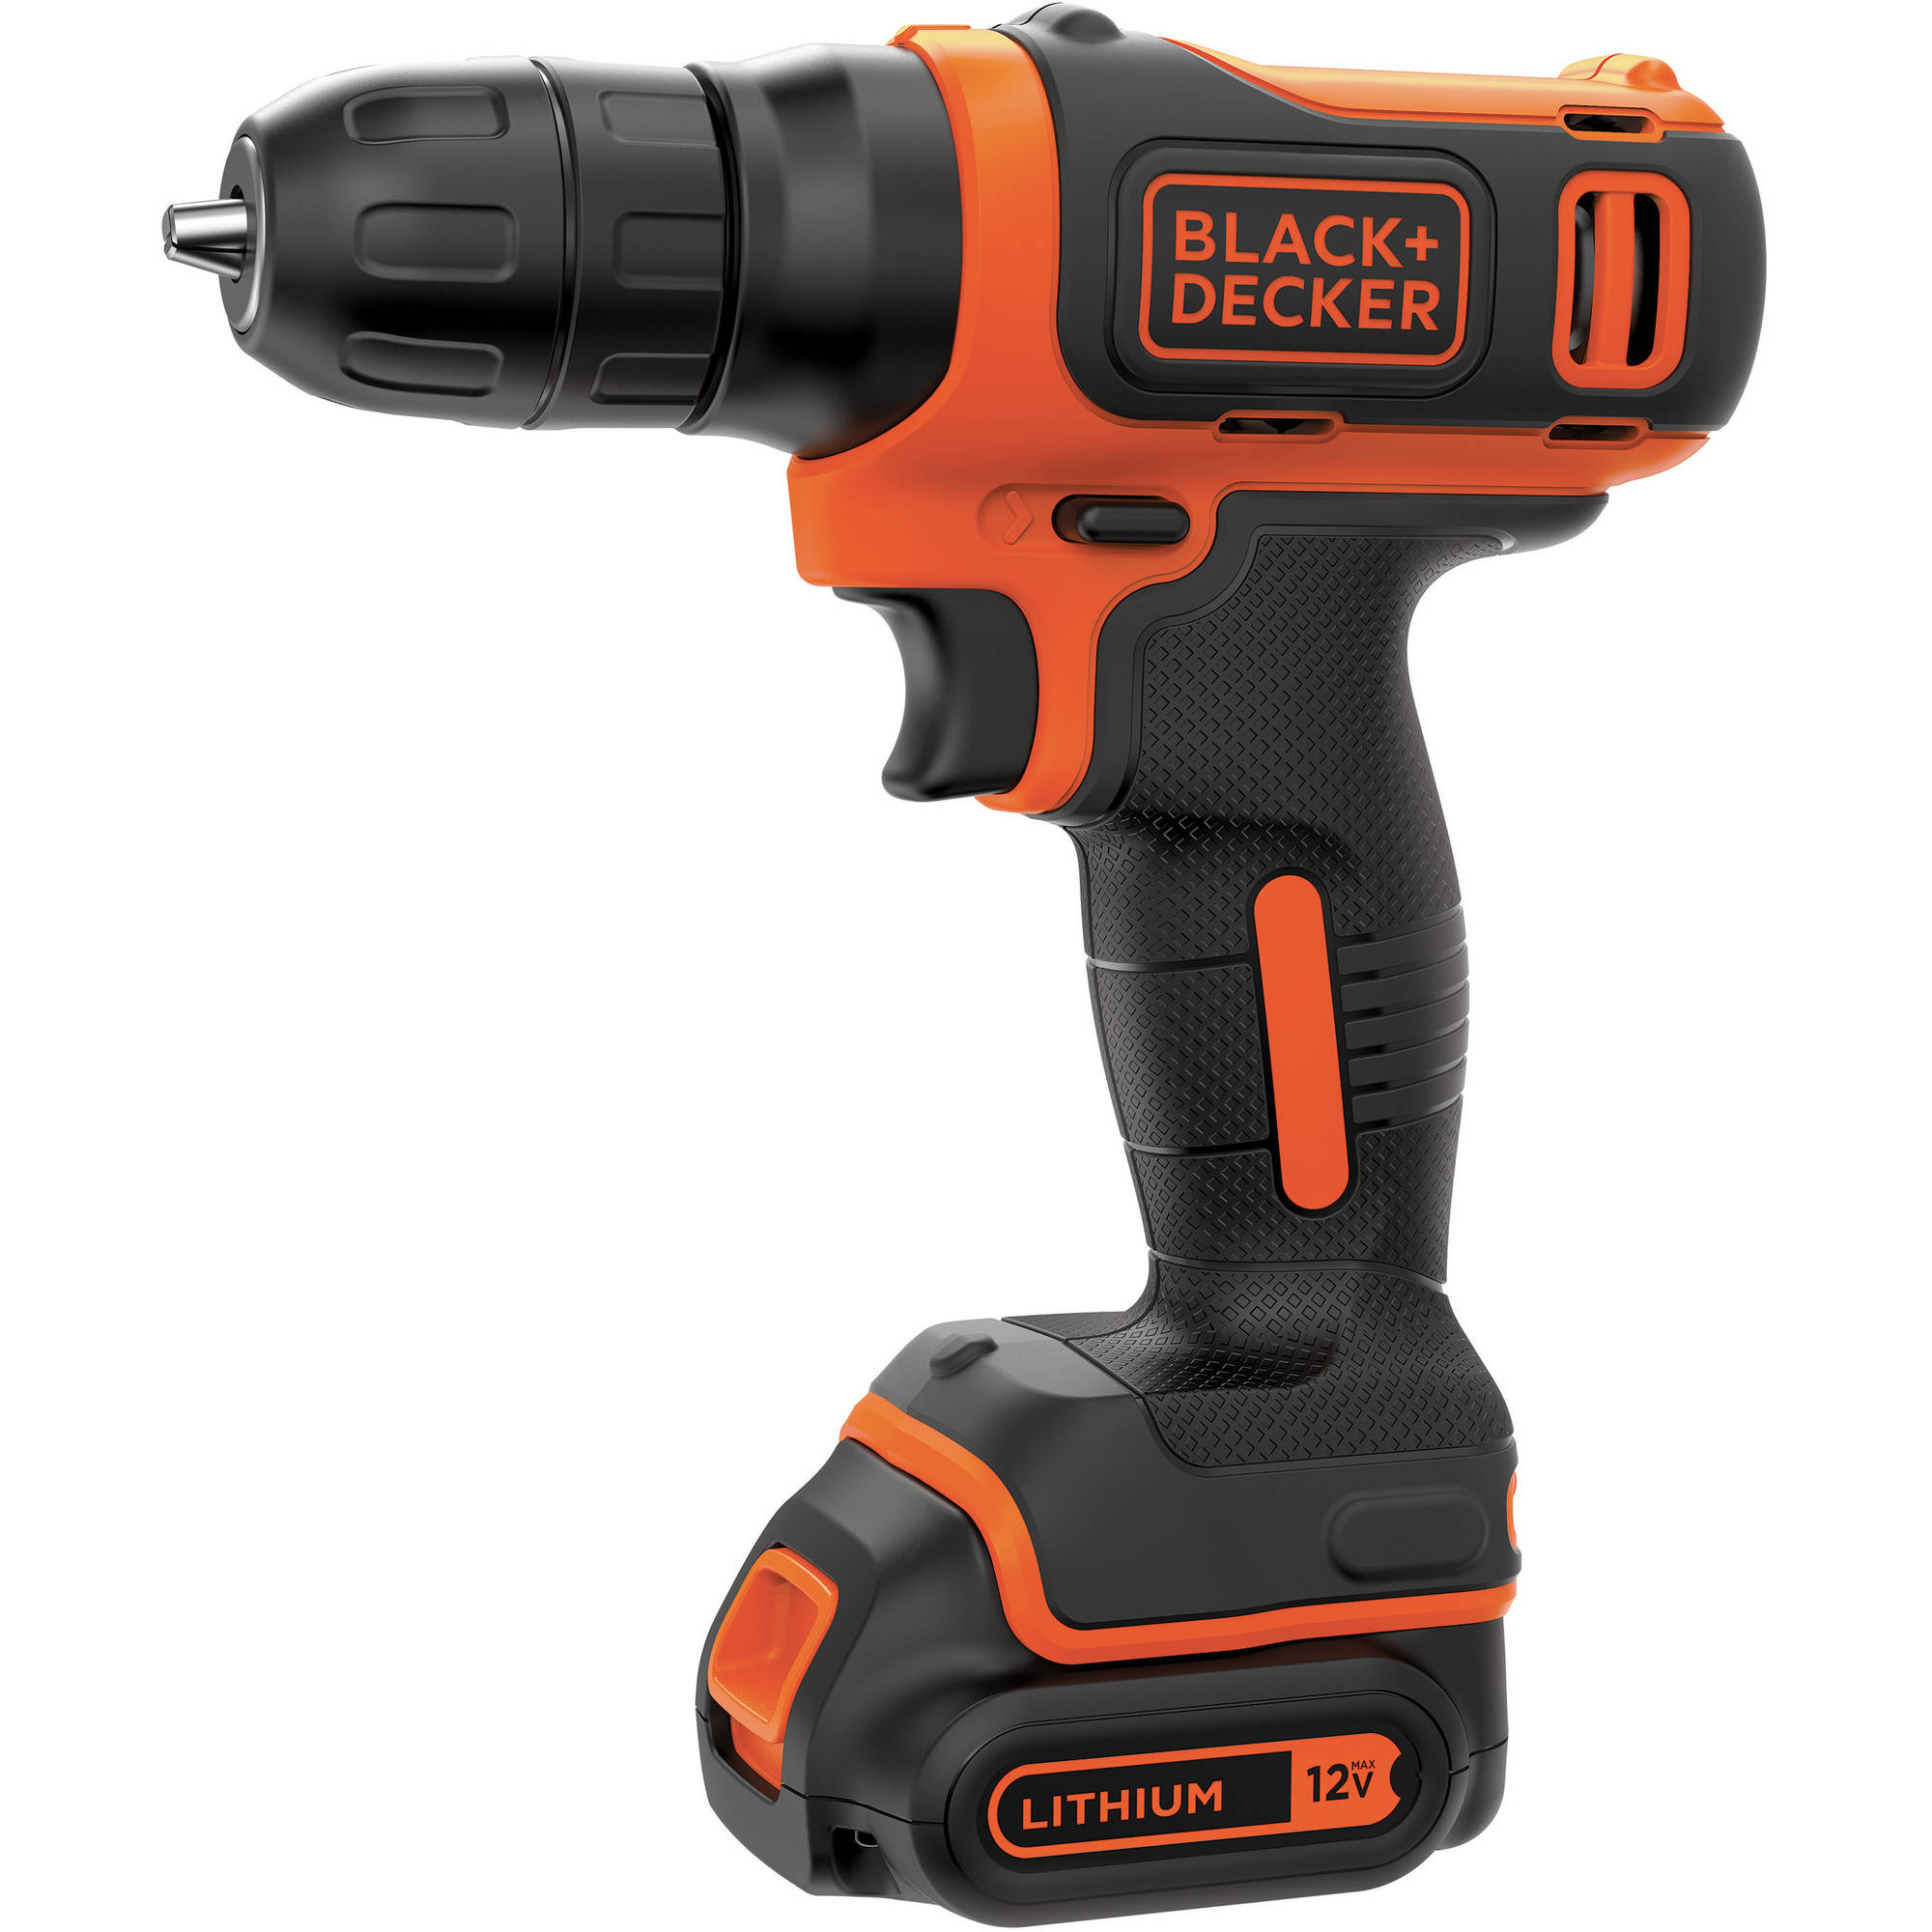 BLACK+DECKER 12-Volt MAX* Lithium-Ion Cordless Drill With 64-Piece Project Kit, BDCD11264PKWM - image 2 of 5